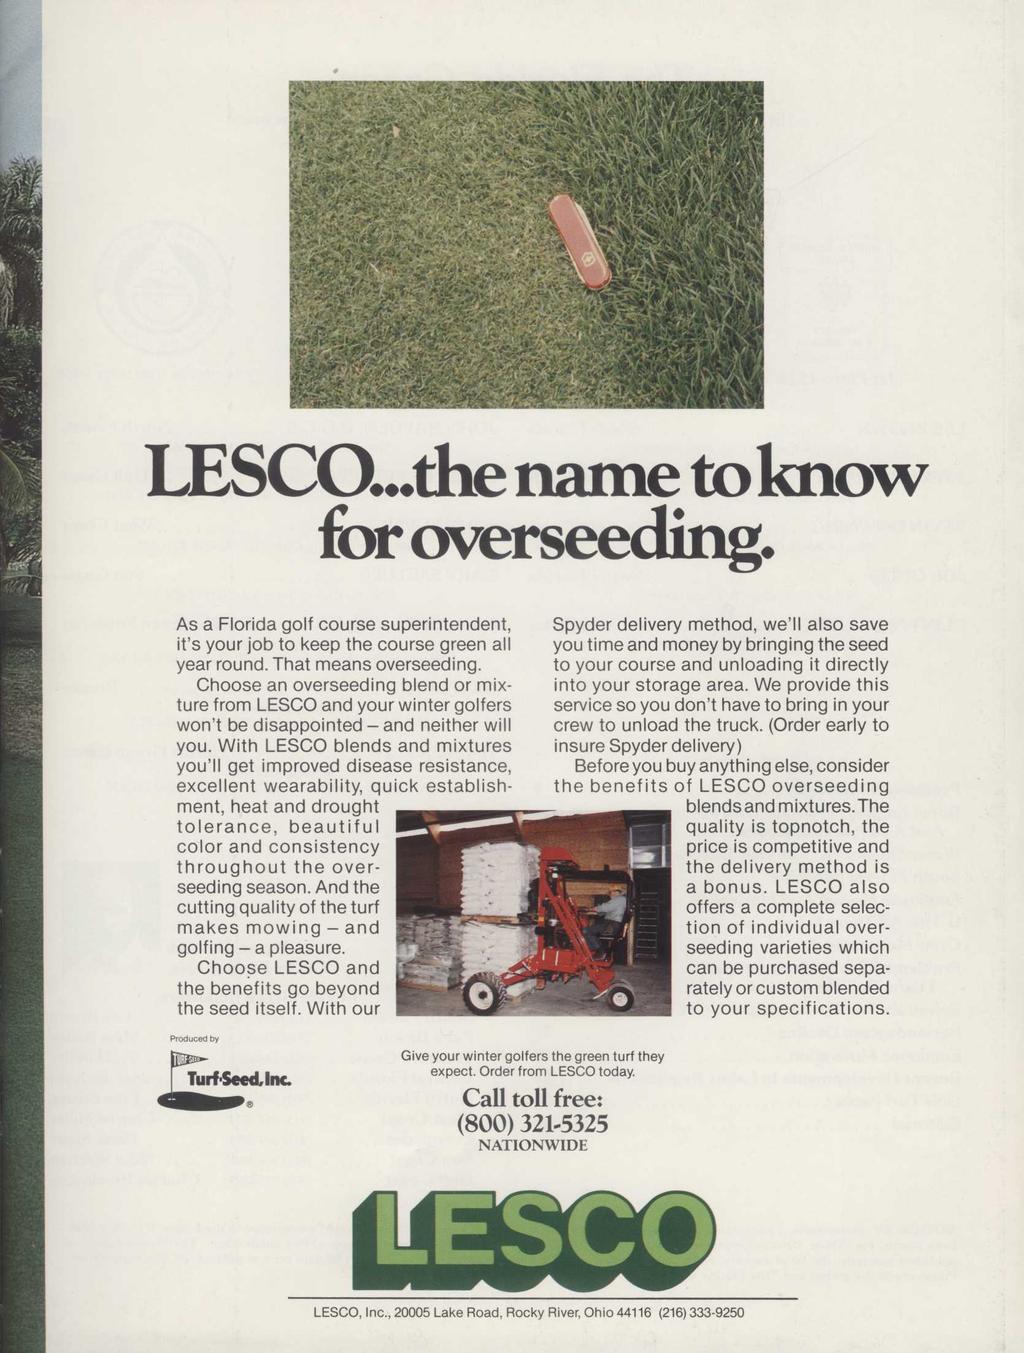 LESCO...the name to know for overseeding. As a Florida golf course superintendent, it's your job to keep the course green all year round. That means overseeding.